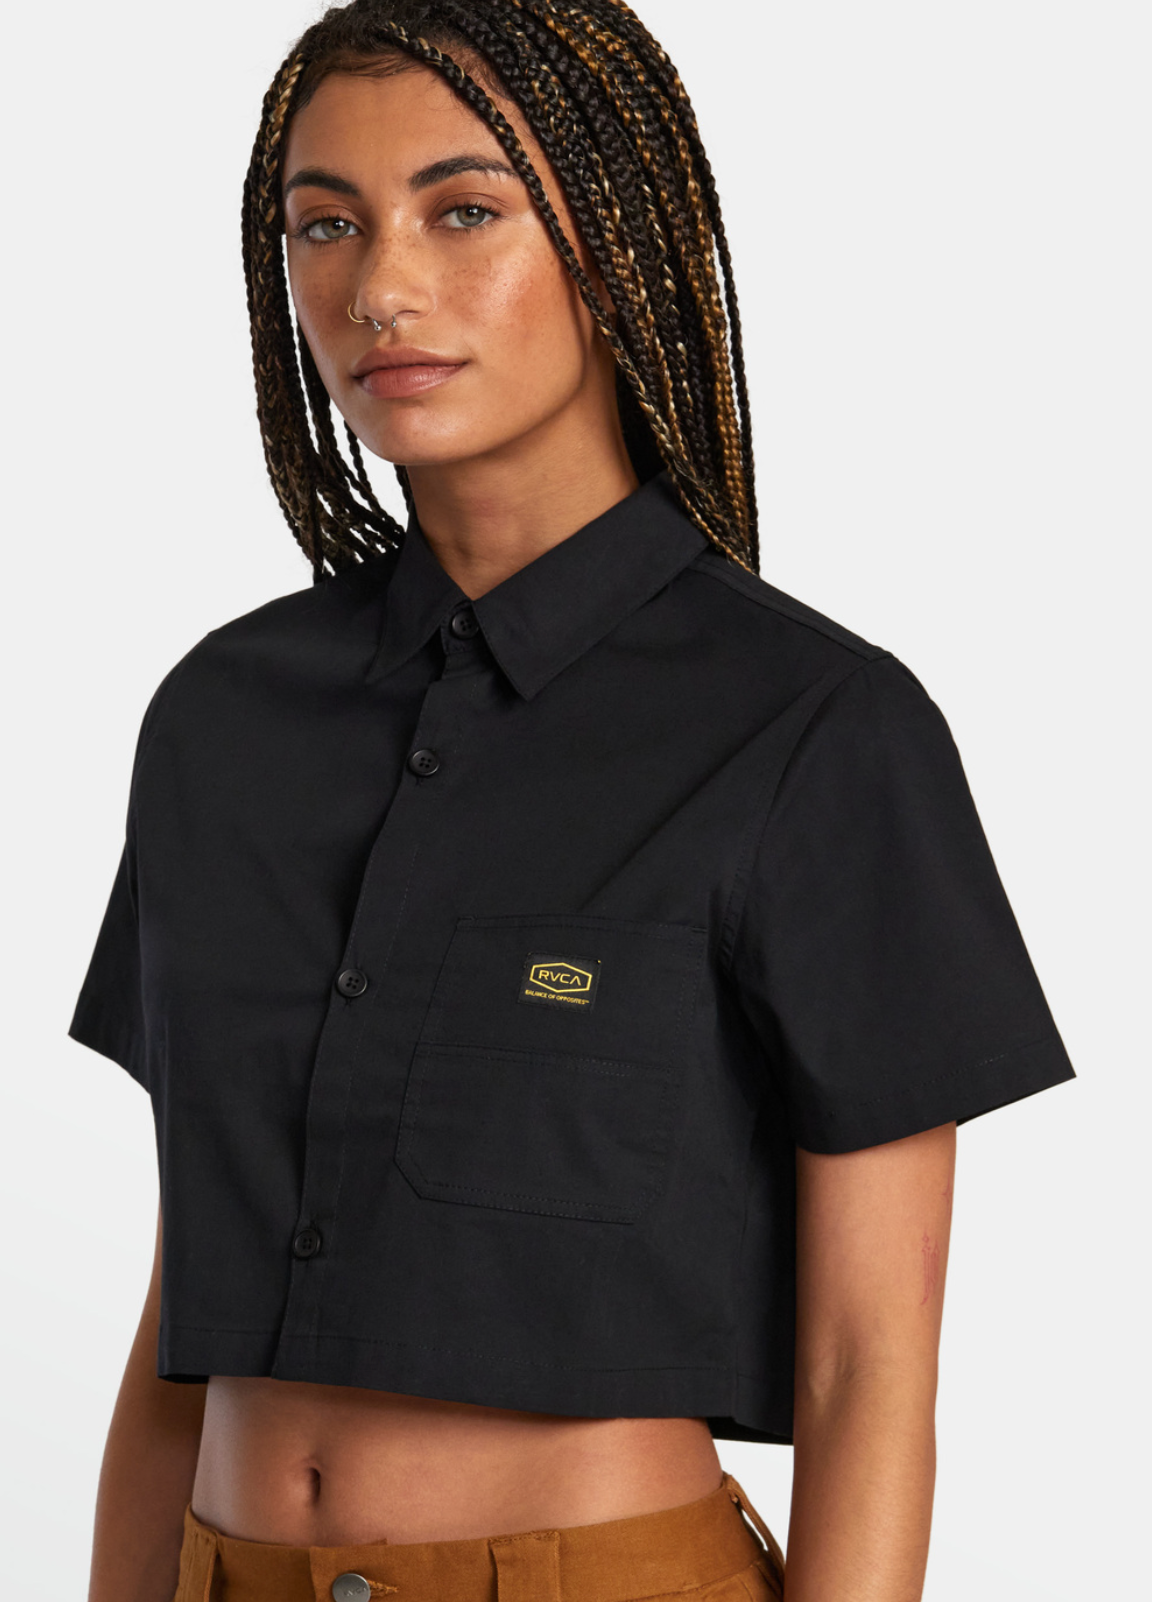 RVCA Recession 2 Cropped Shirt